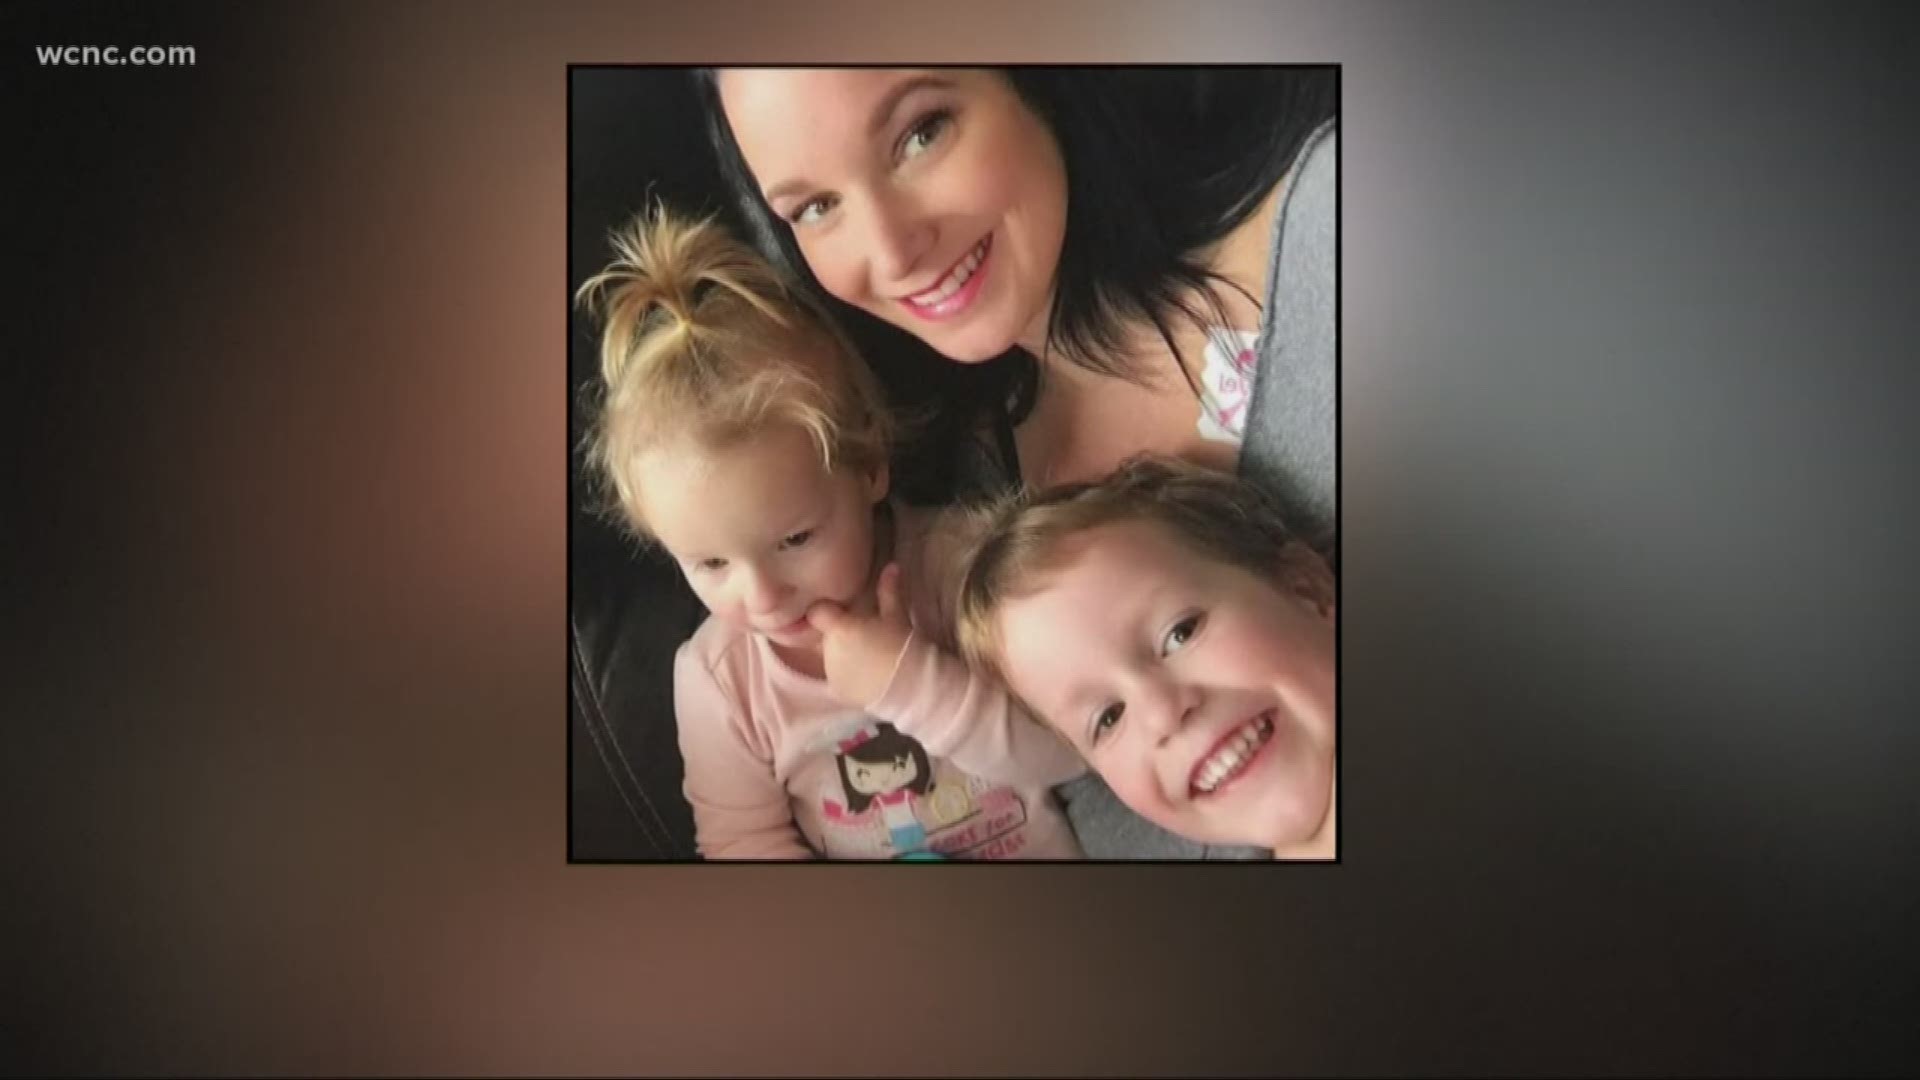 The funeral for Shanann Watts and her two daughters will be held in Pinehurst, NC. Shanann's husband Chris is charged with their murders.